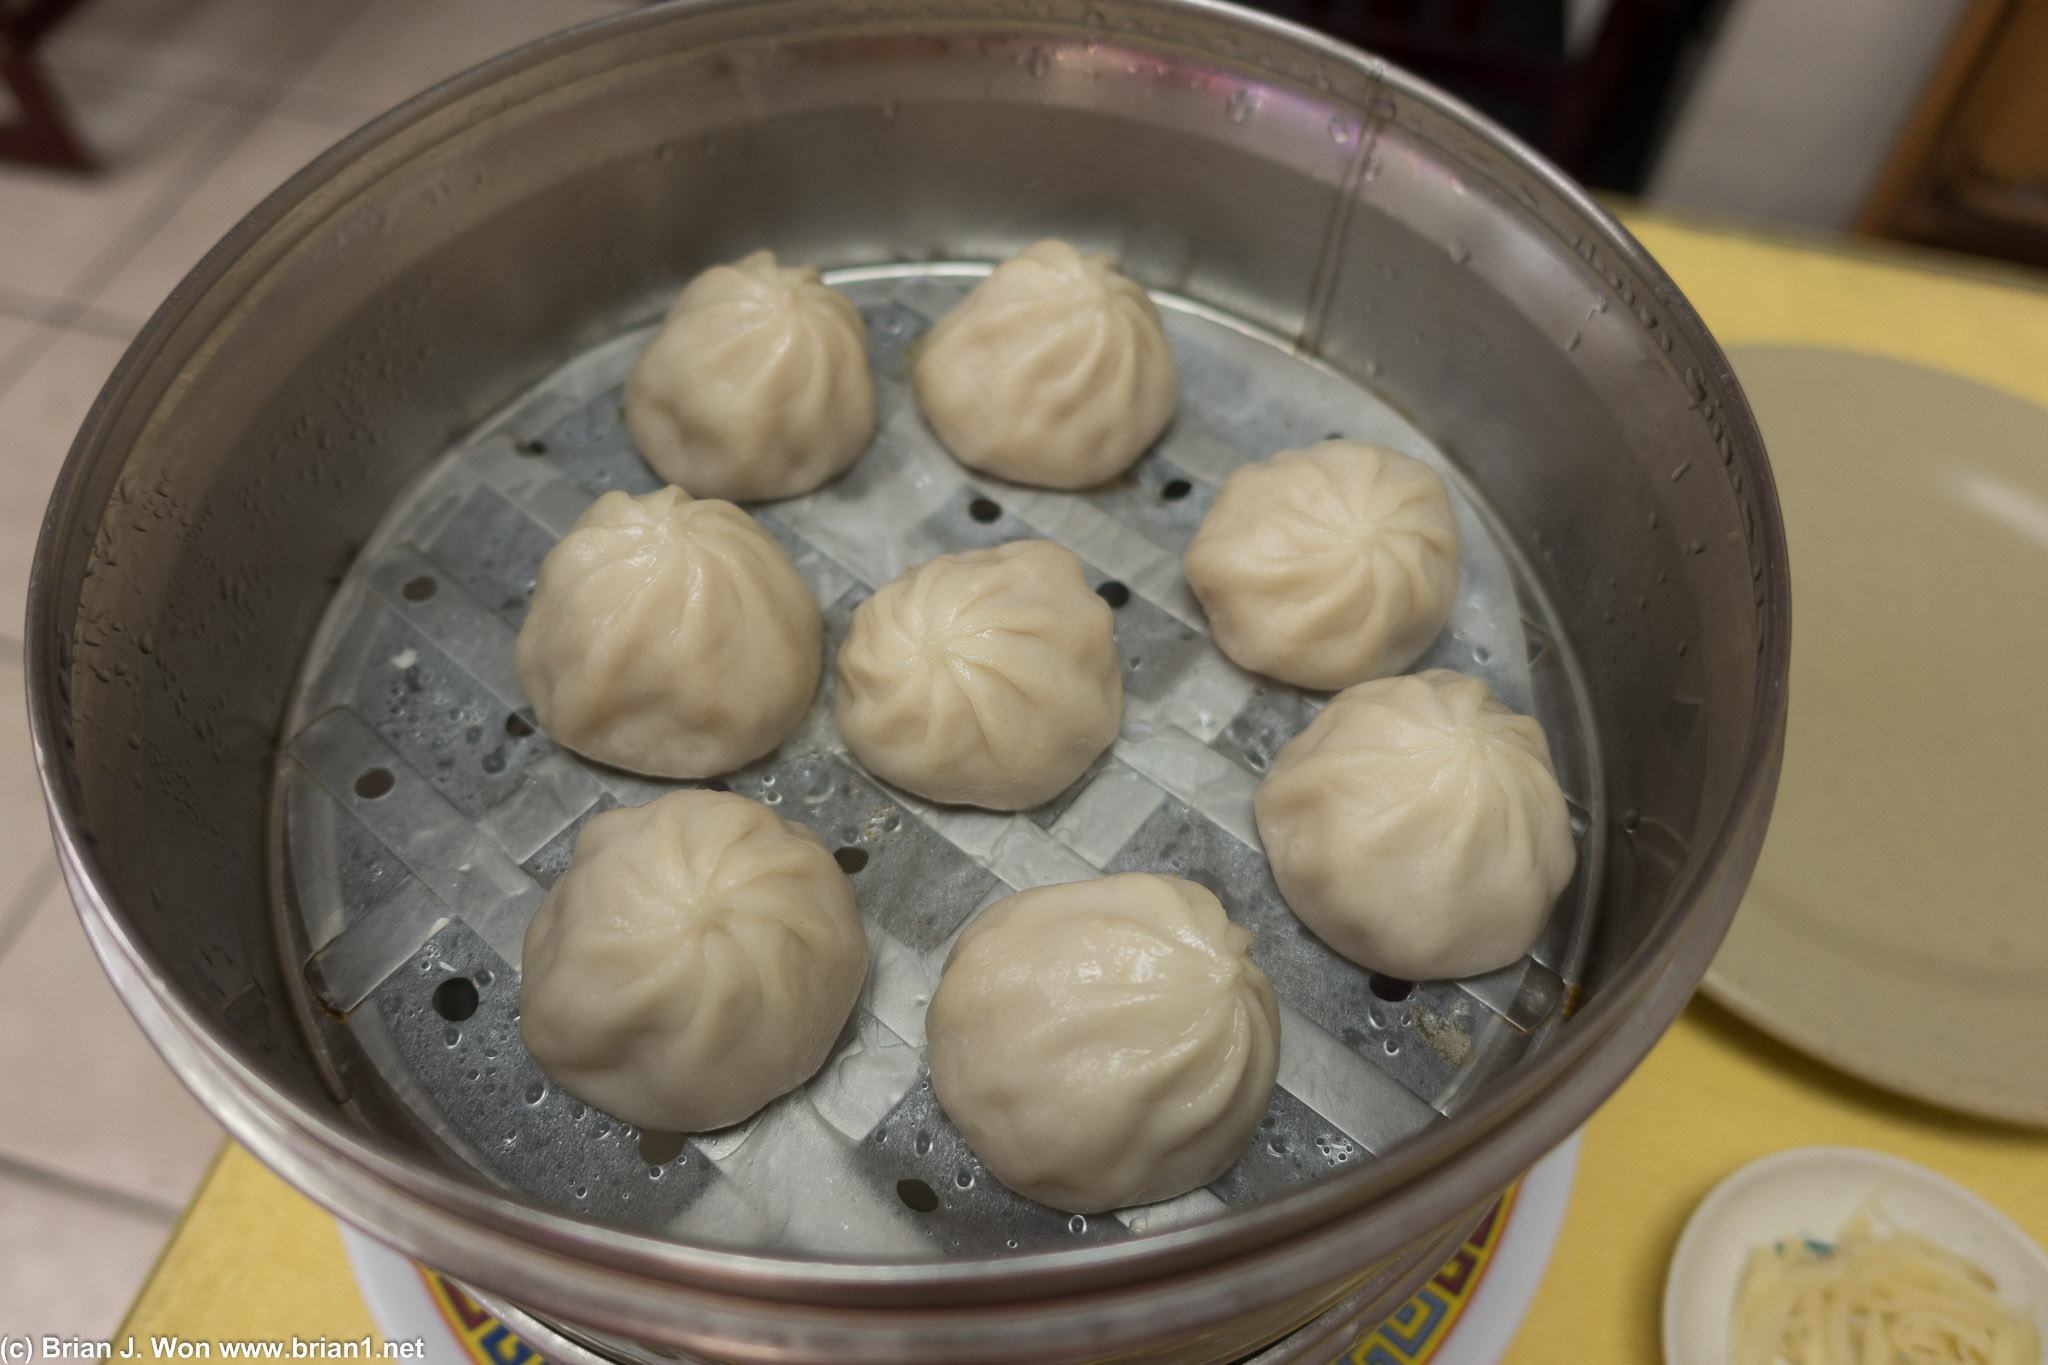 Xiao long bao portion was generous (2 pans!) but skins were too thick.